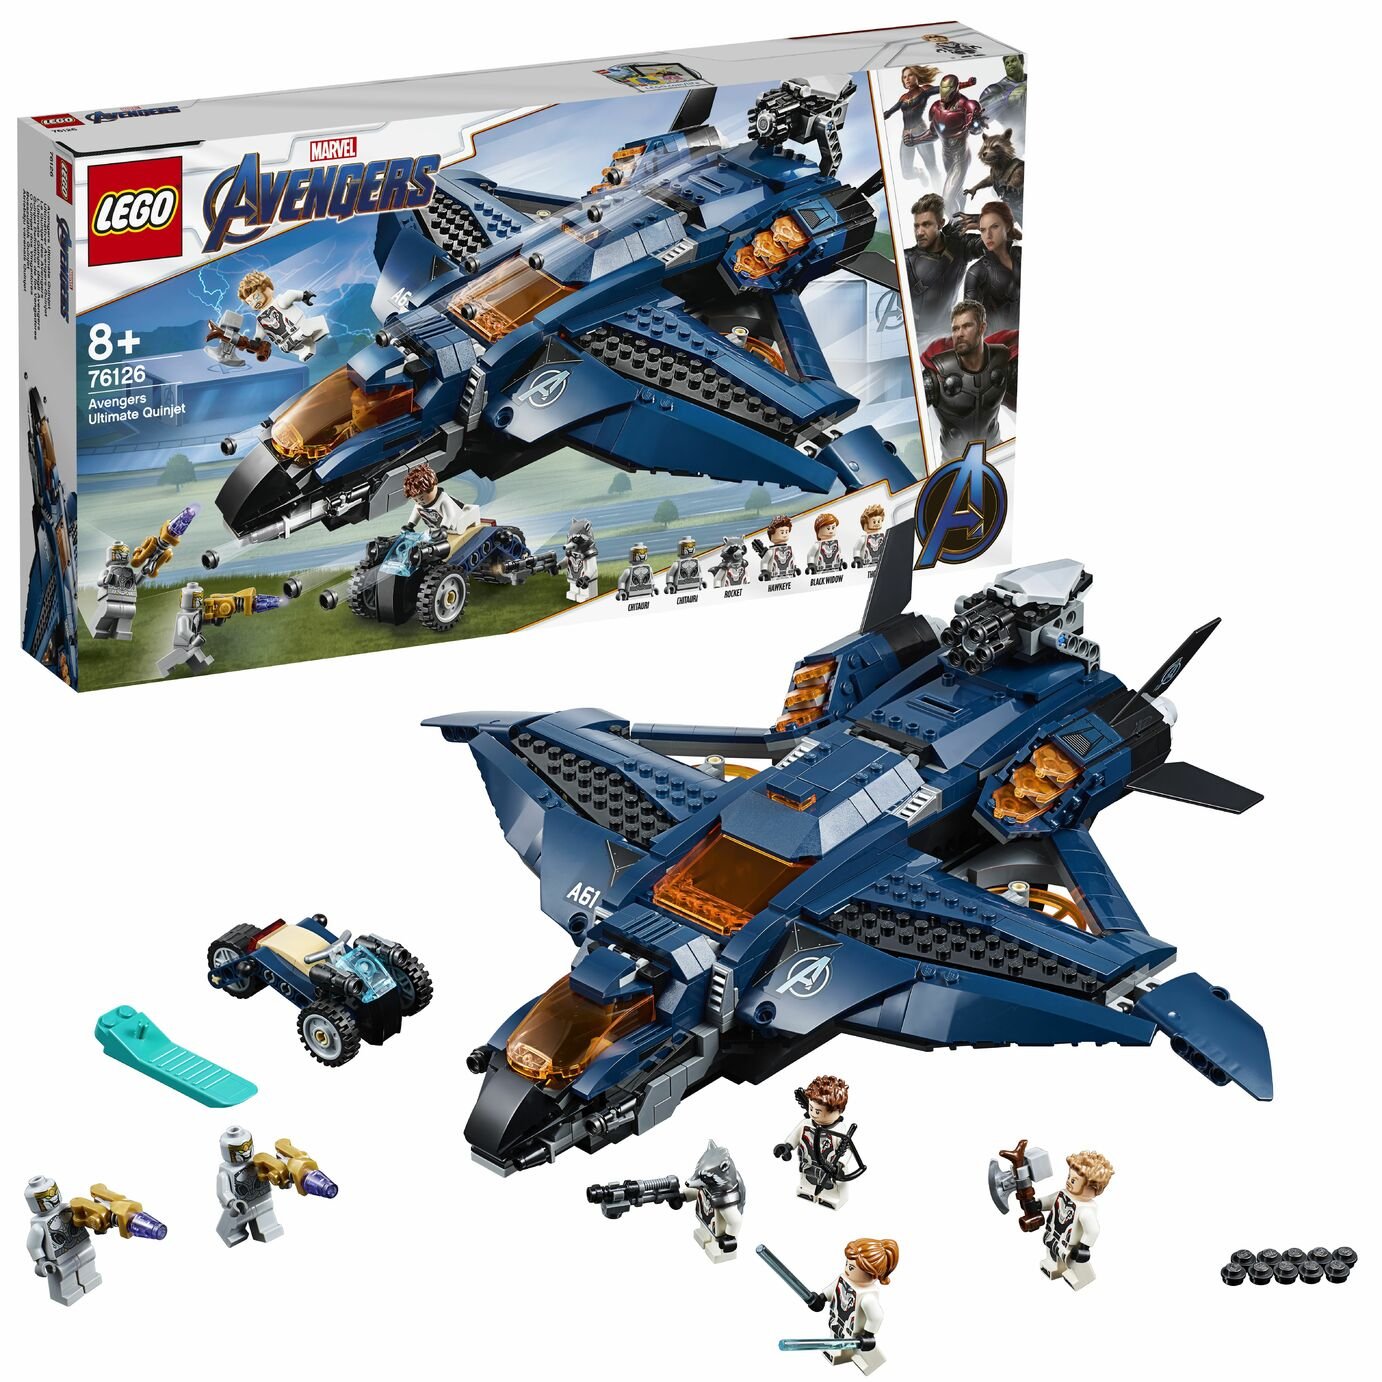 LEGO Marvel Avengers Ultimate Quinjet Plane Toy Review